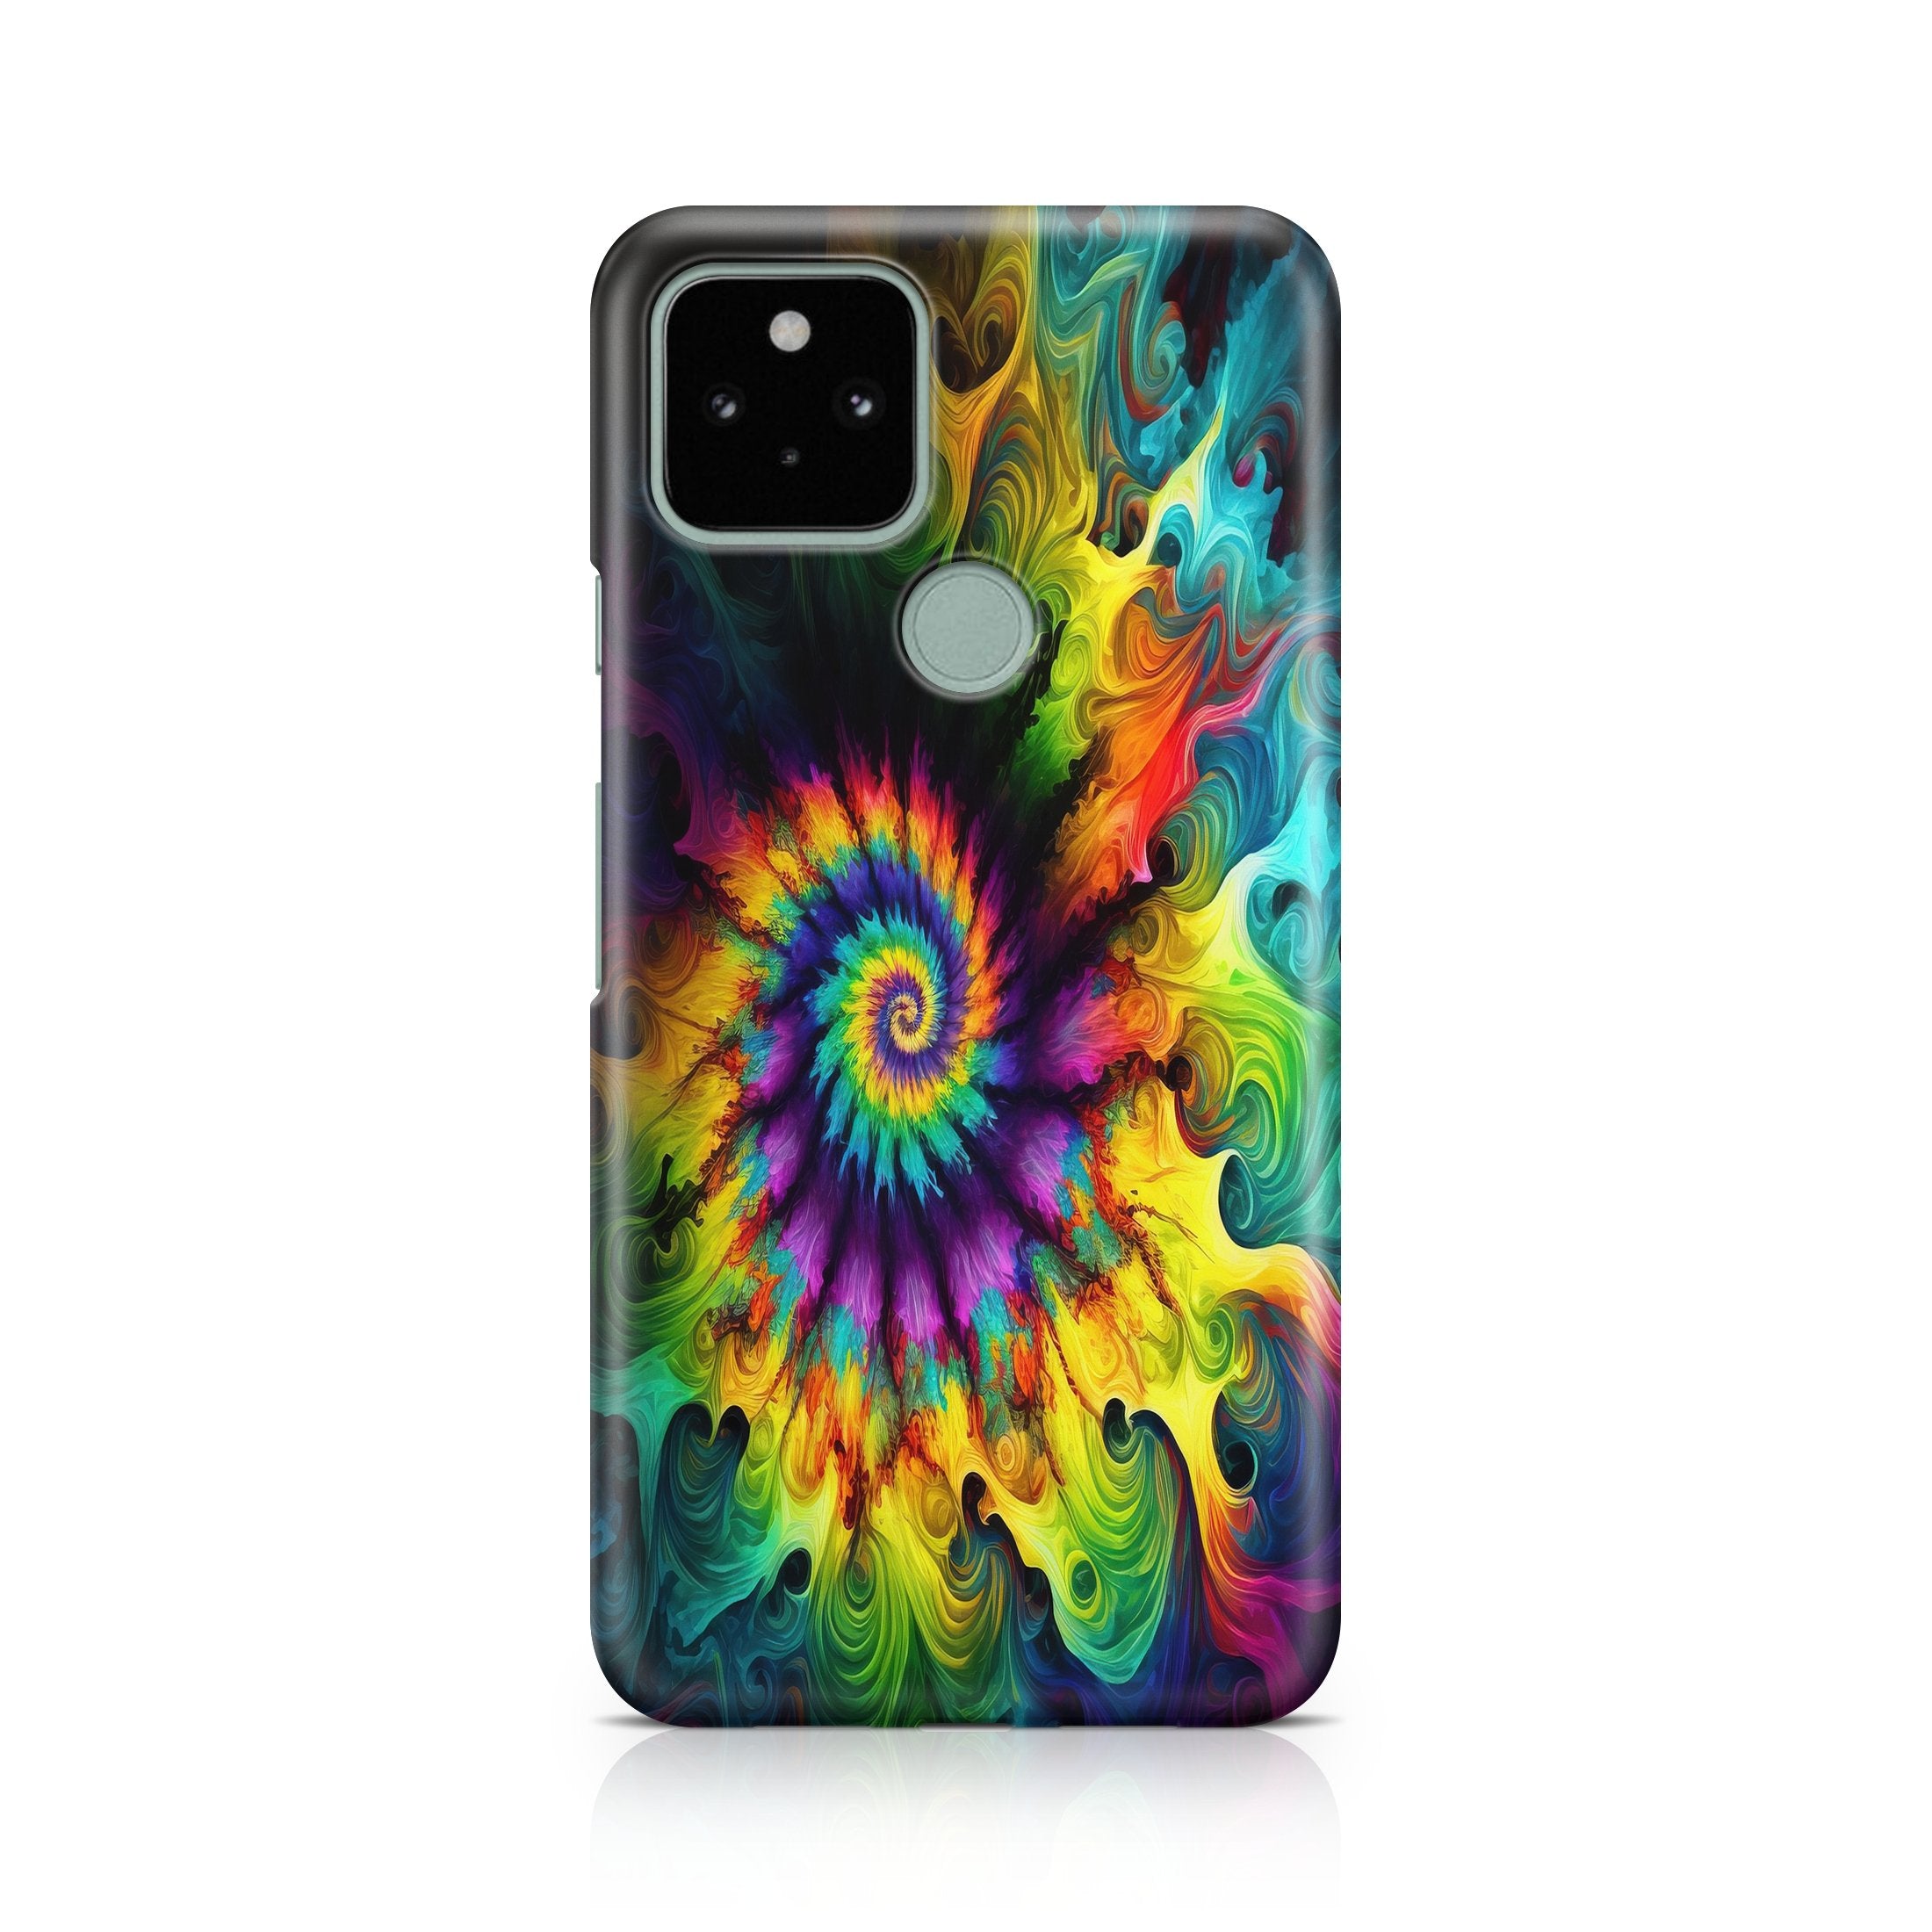 Myst Spiral - Google phone case designs by CaseSwagger